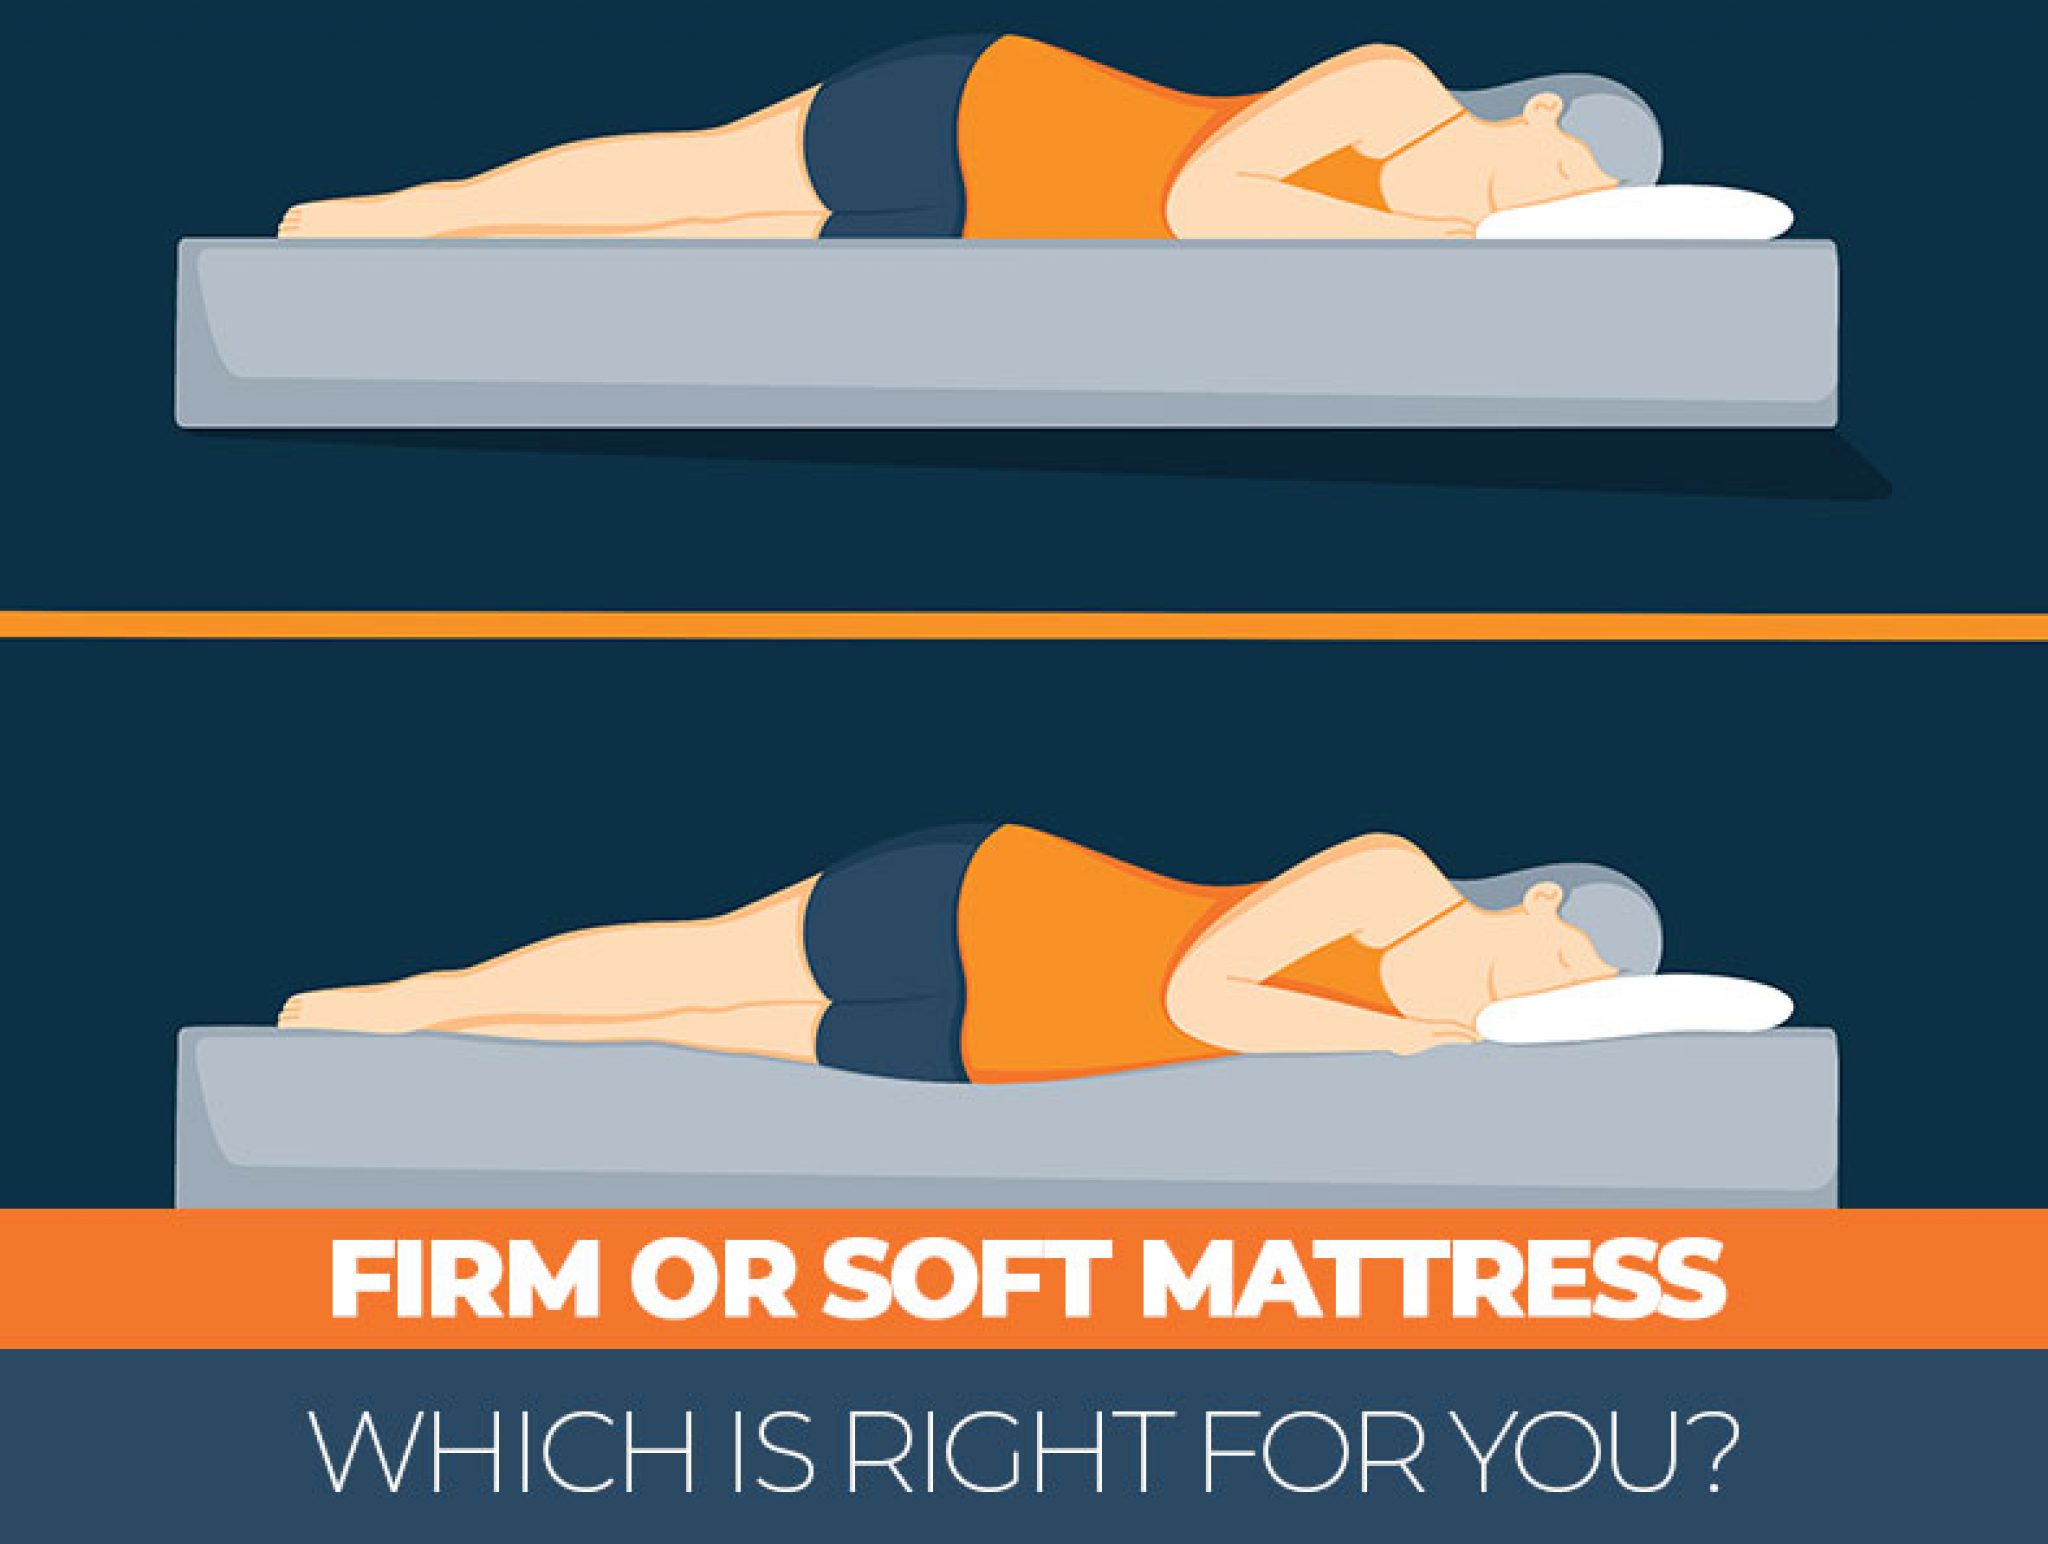 if possible we prefer firm mattress